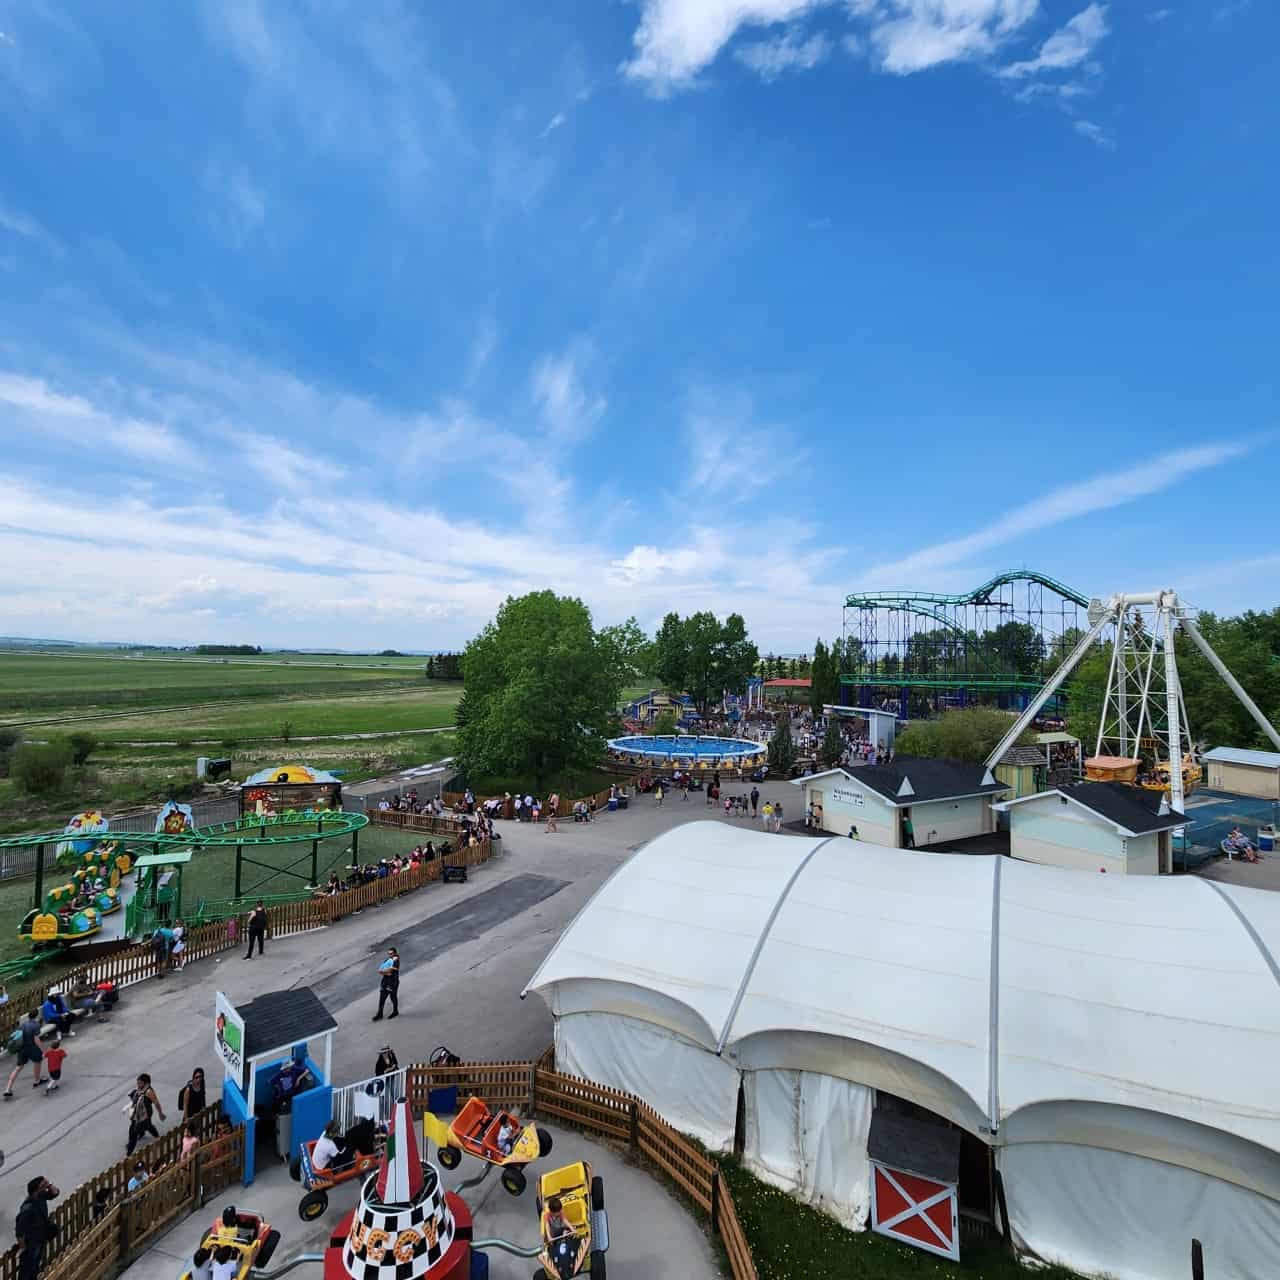 Birds Eye View of one side of Calaway Park in Alberta Canada - A fantastic Sunday evening at Calaway Park. As you can see, the park was not very busy in this area which made for some quick lines!